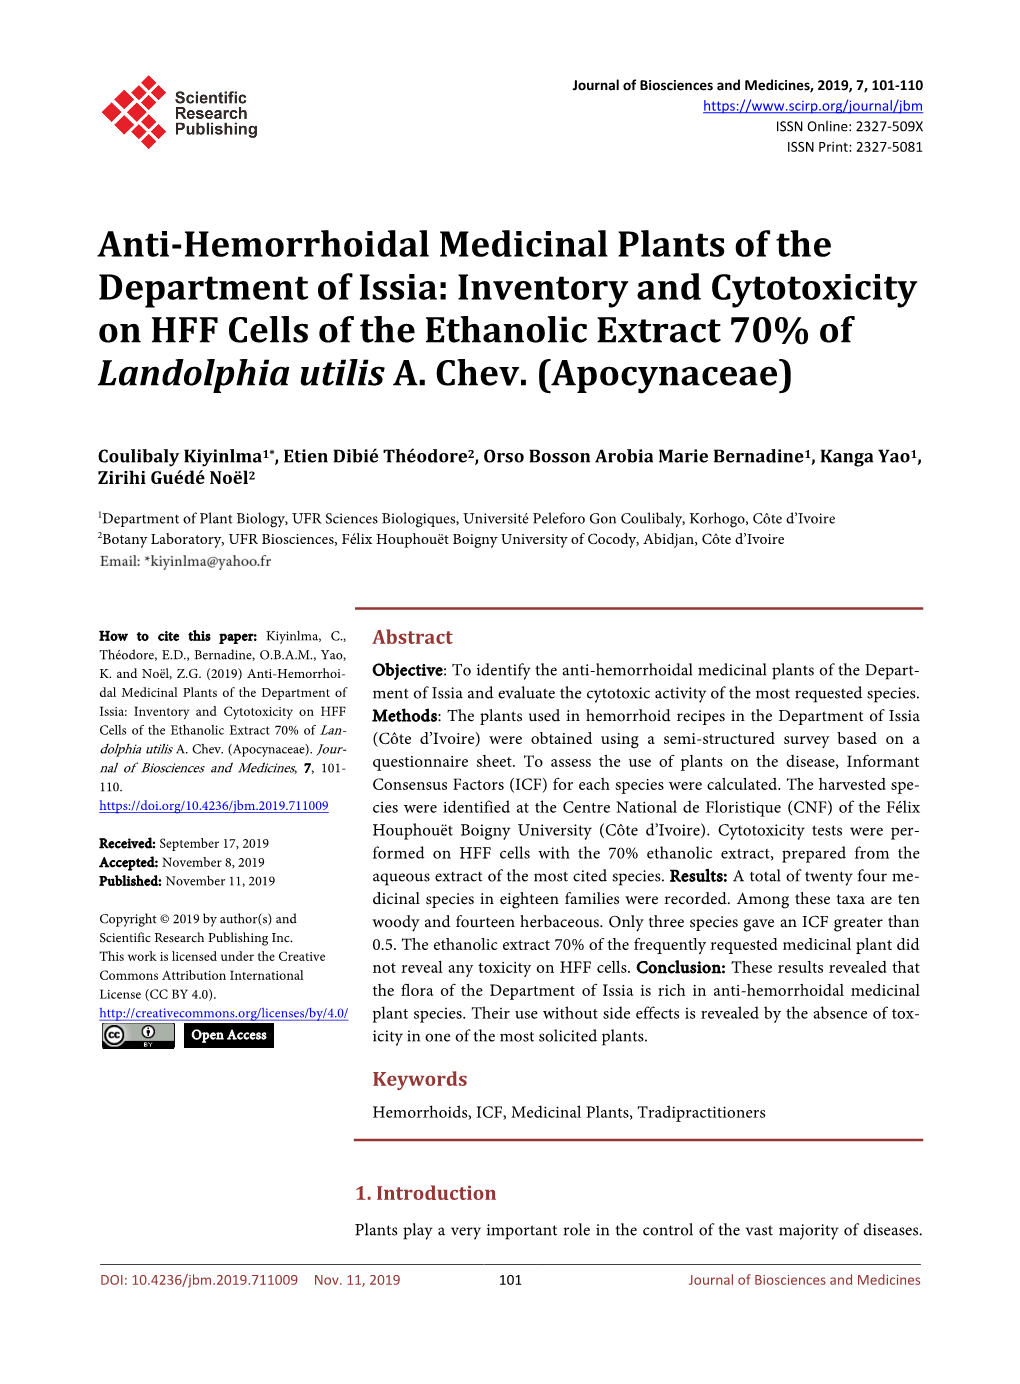 Anti-Hemorrhoidal Medicinal Plants of the Department of Issia: Inventory and Cytotoxicity on HFF Cells of the Ethanolic Extract 70% of Landolphia Utilis A